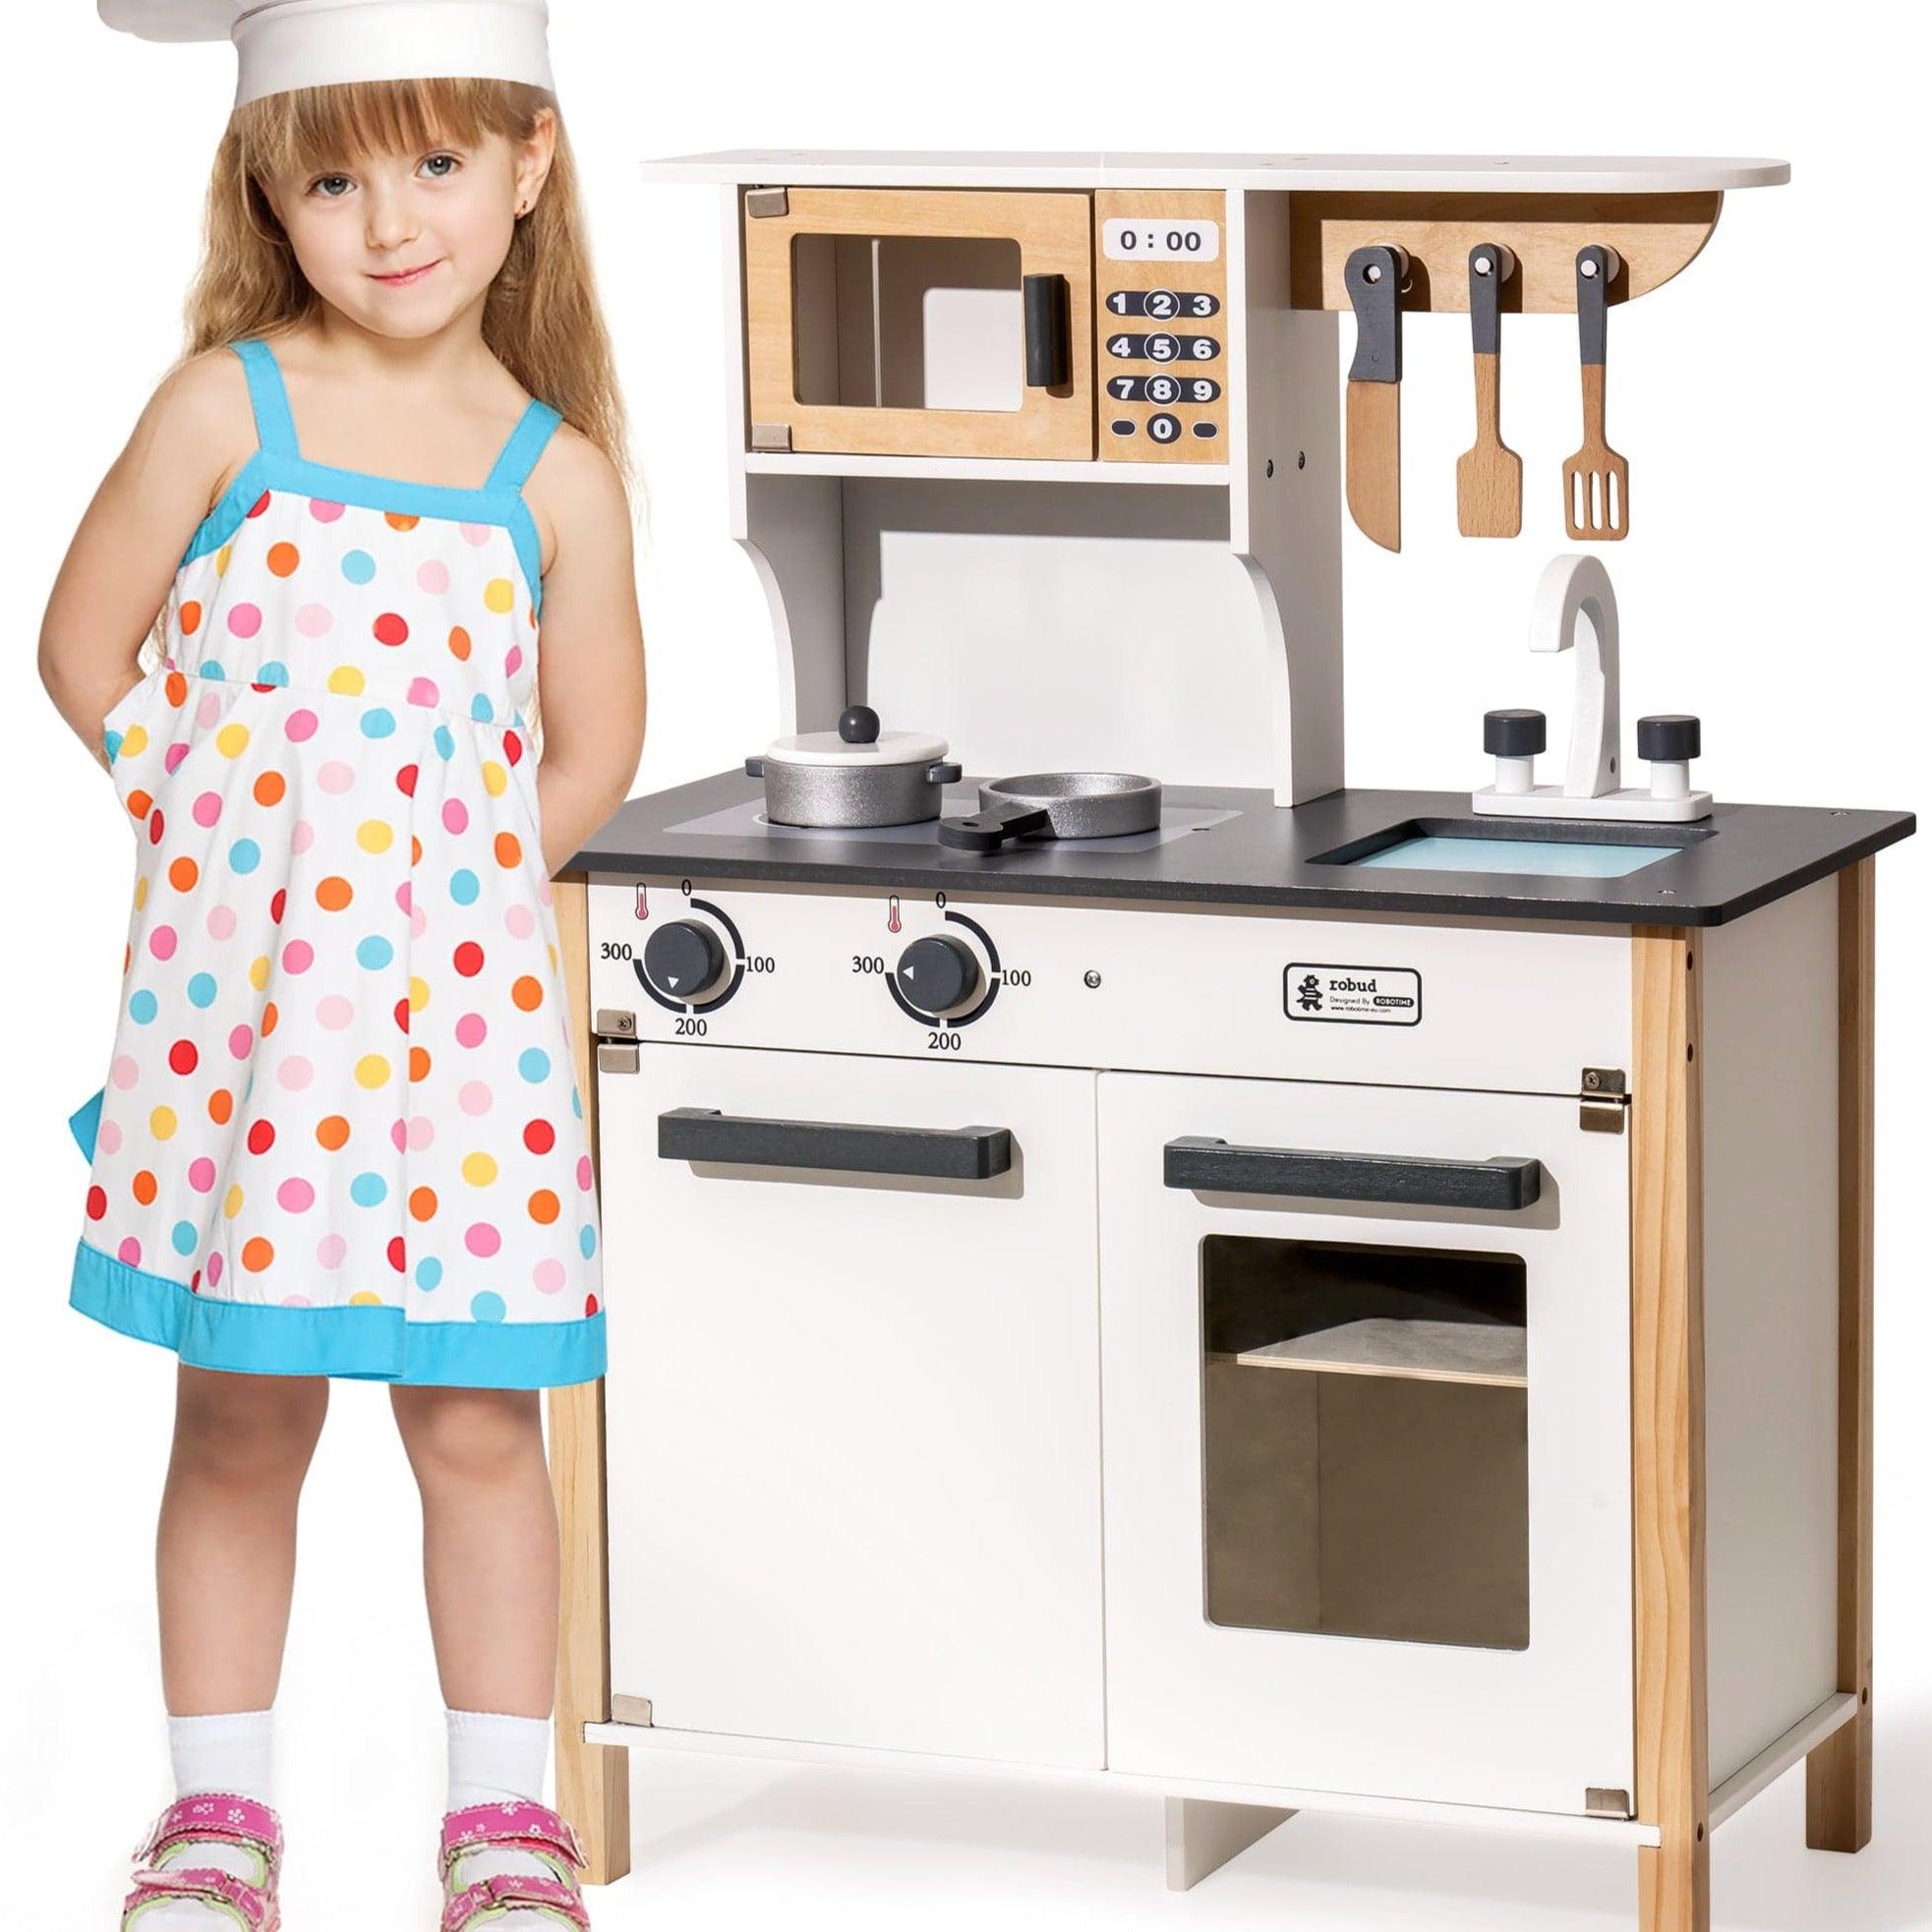 Shop Pretend Wooden Kitchen Play set for Kids and Children, Gifts for New Year, Christmas and Birthday, White Mademoiselle Home Decor